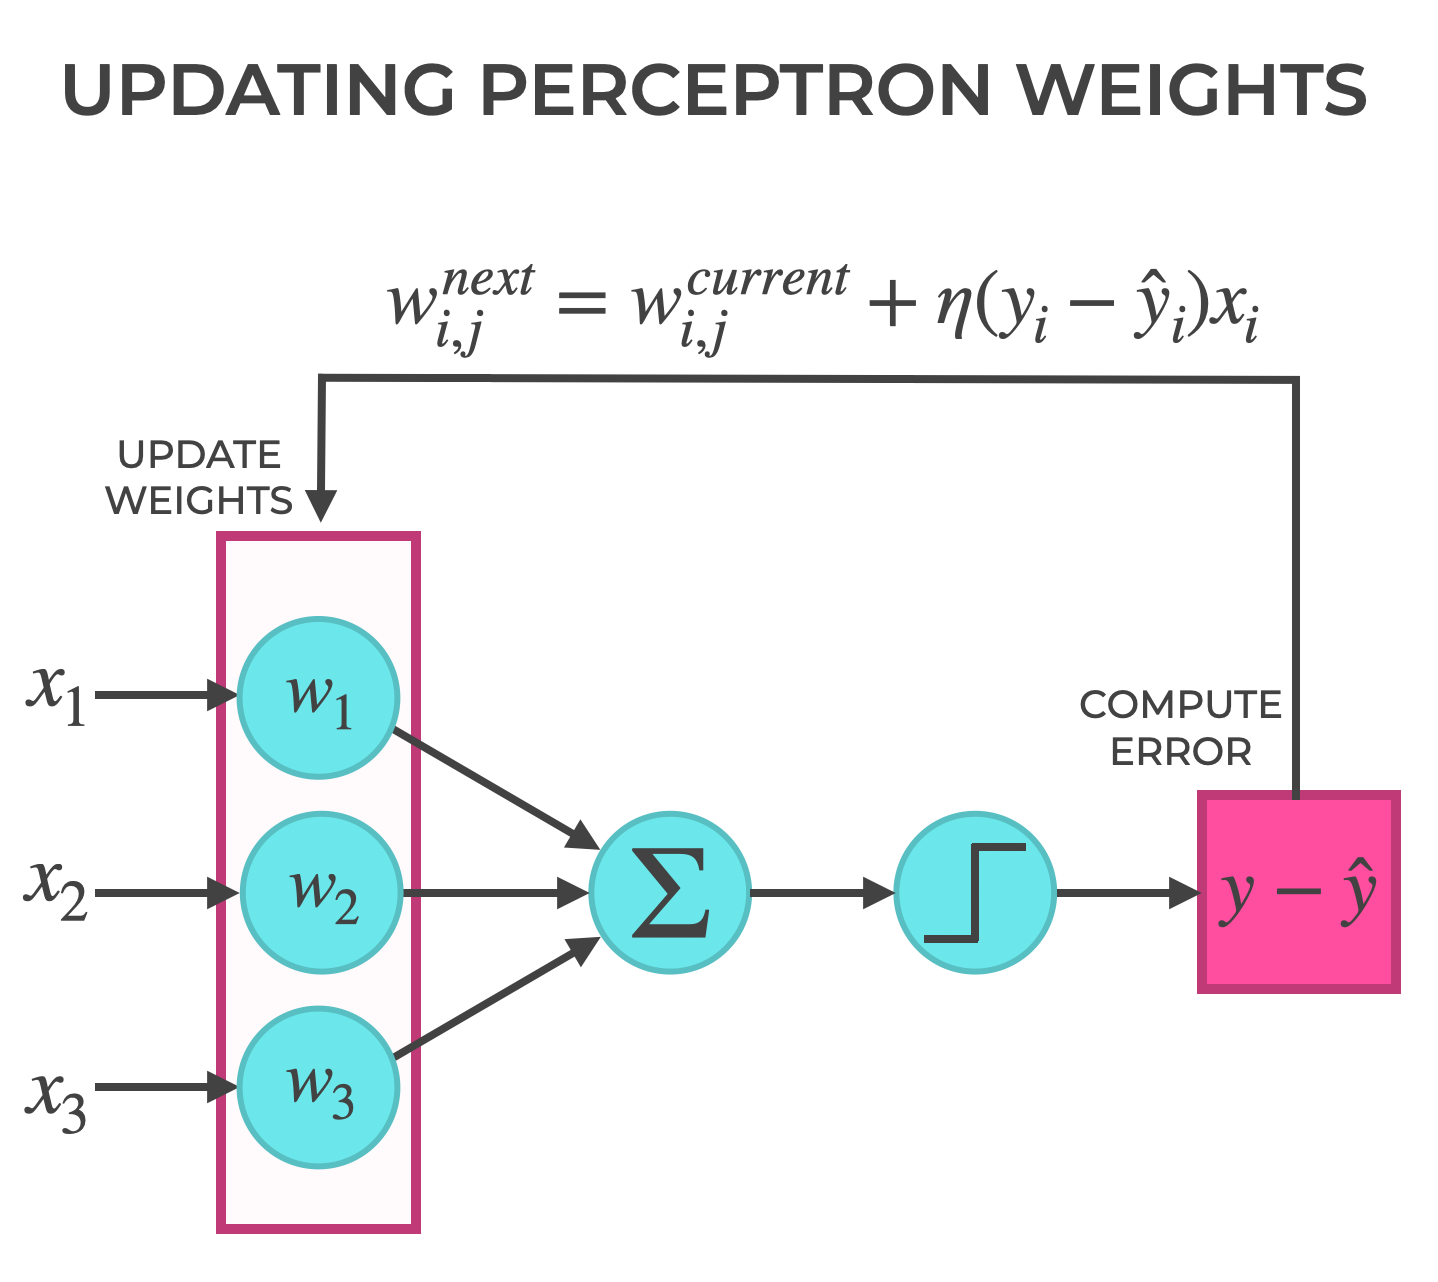 An image that shows how the weights are updated during Perceptron training, using the perceptron learning rule.